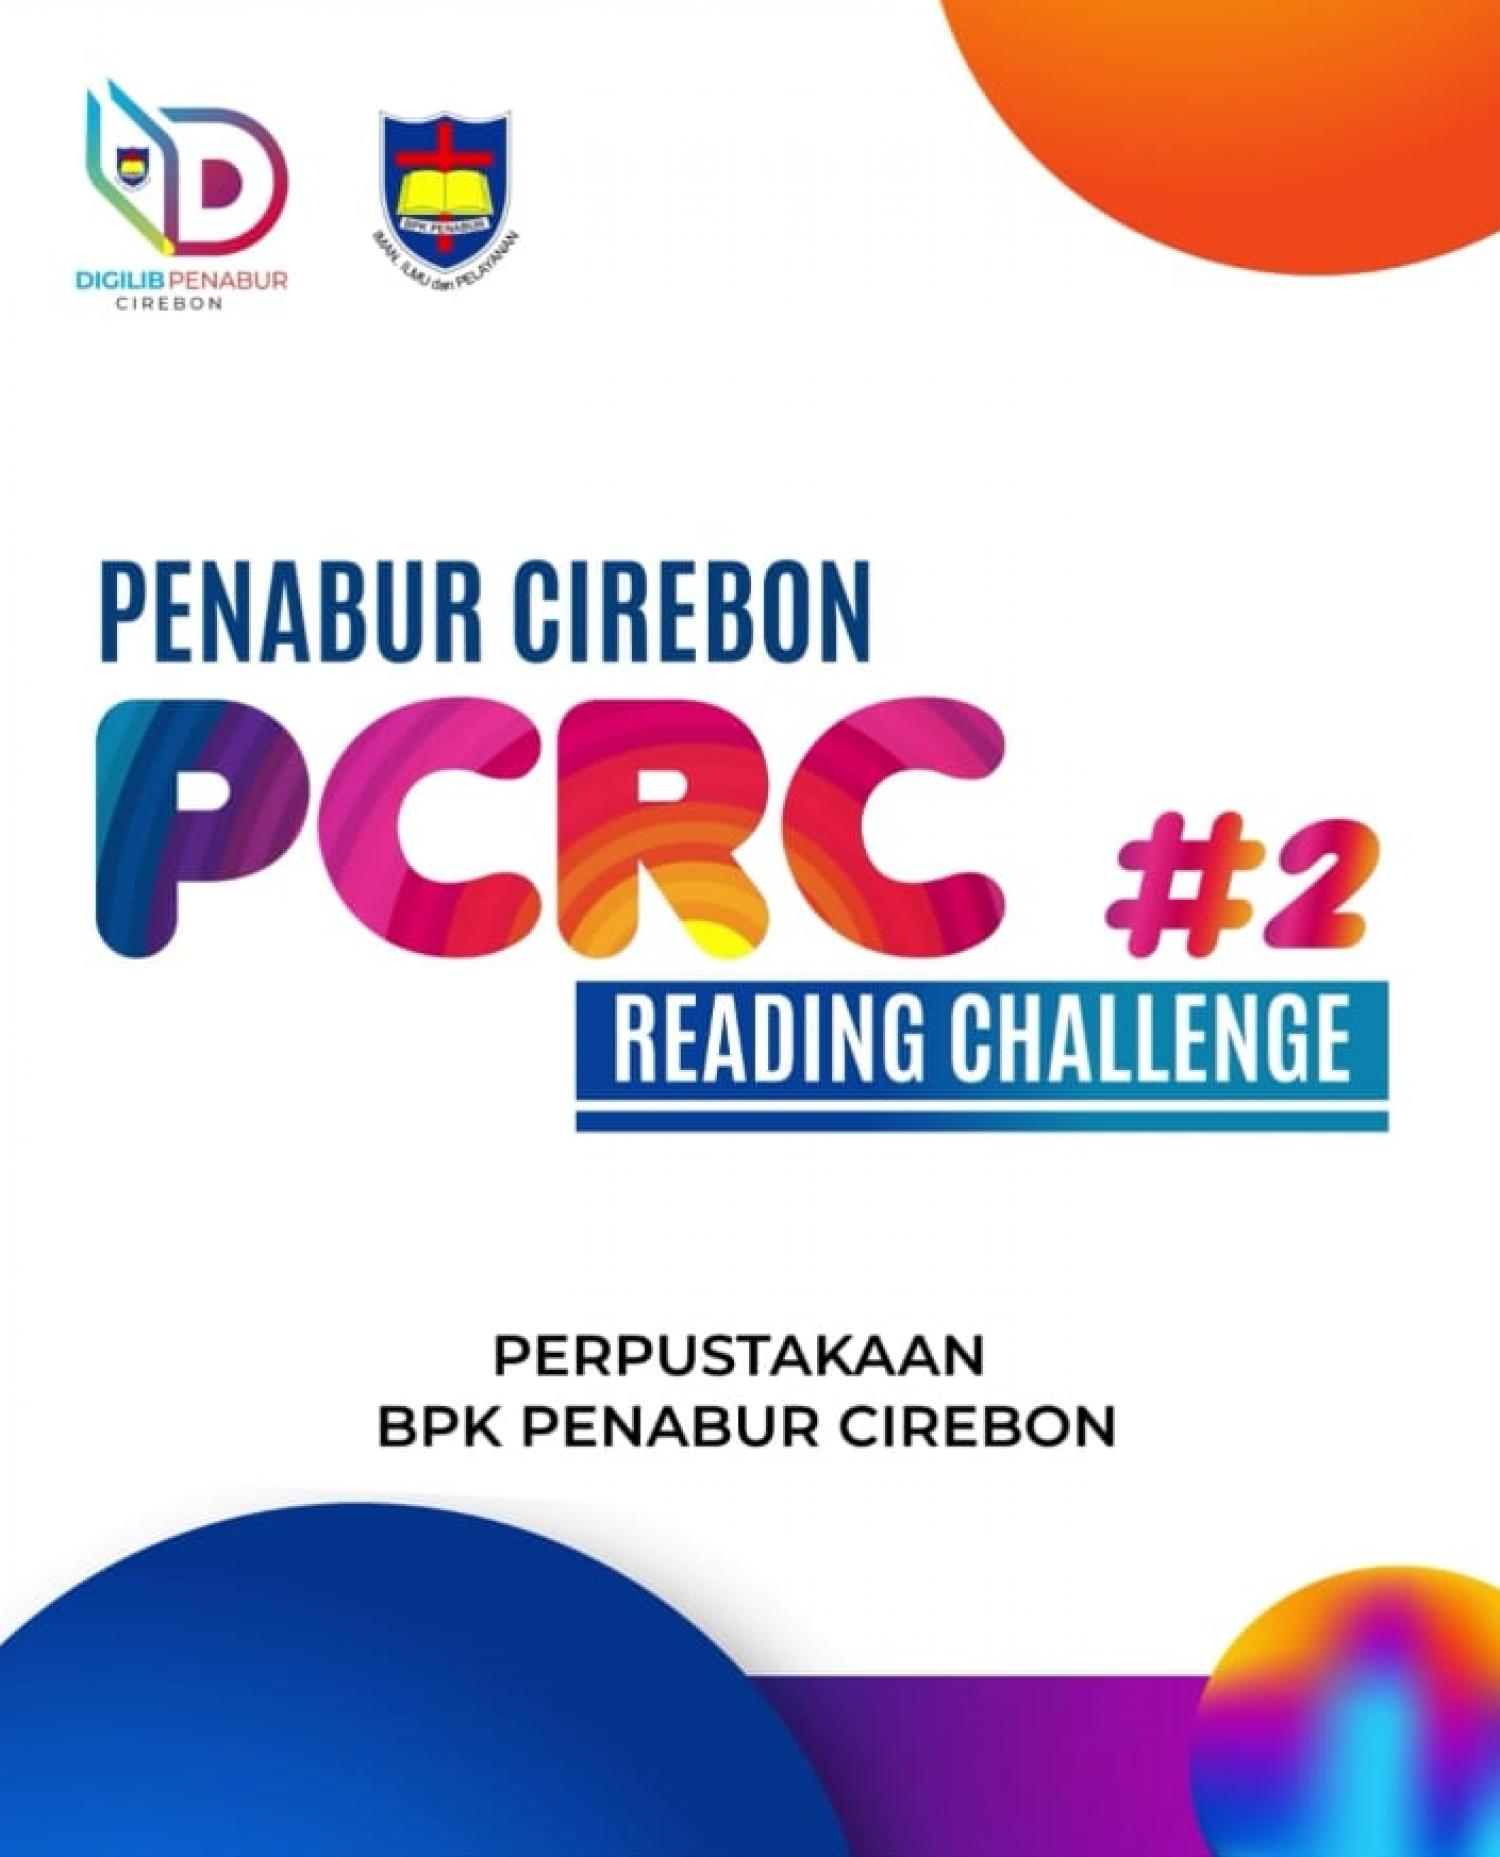 Are You Ready to PCRC #2?